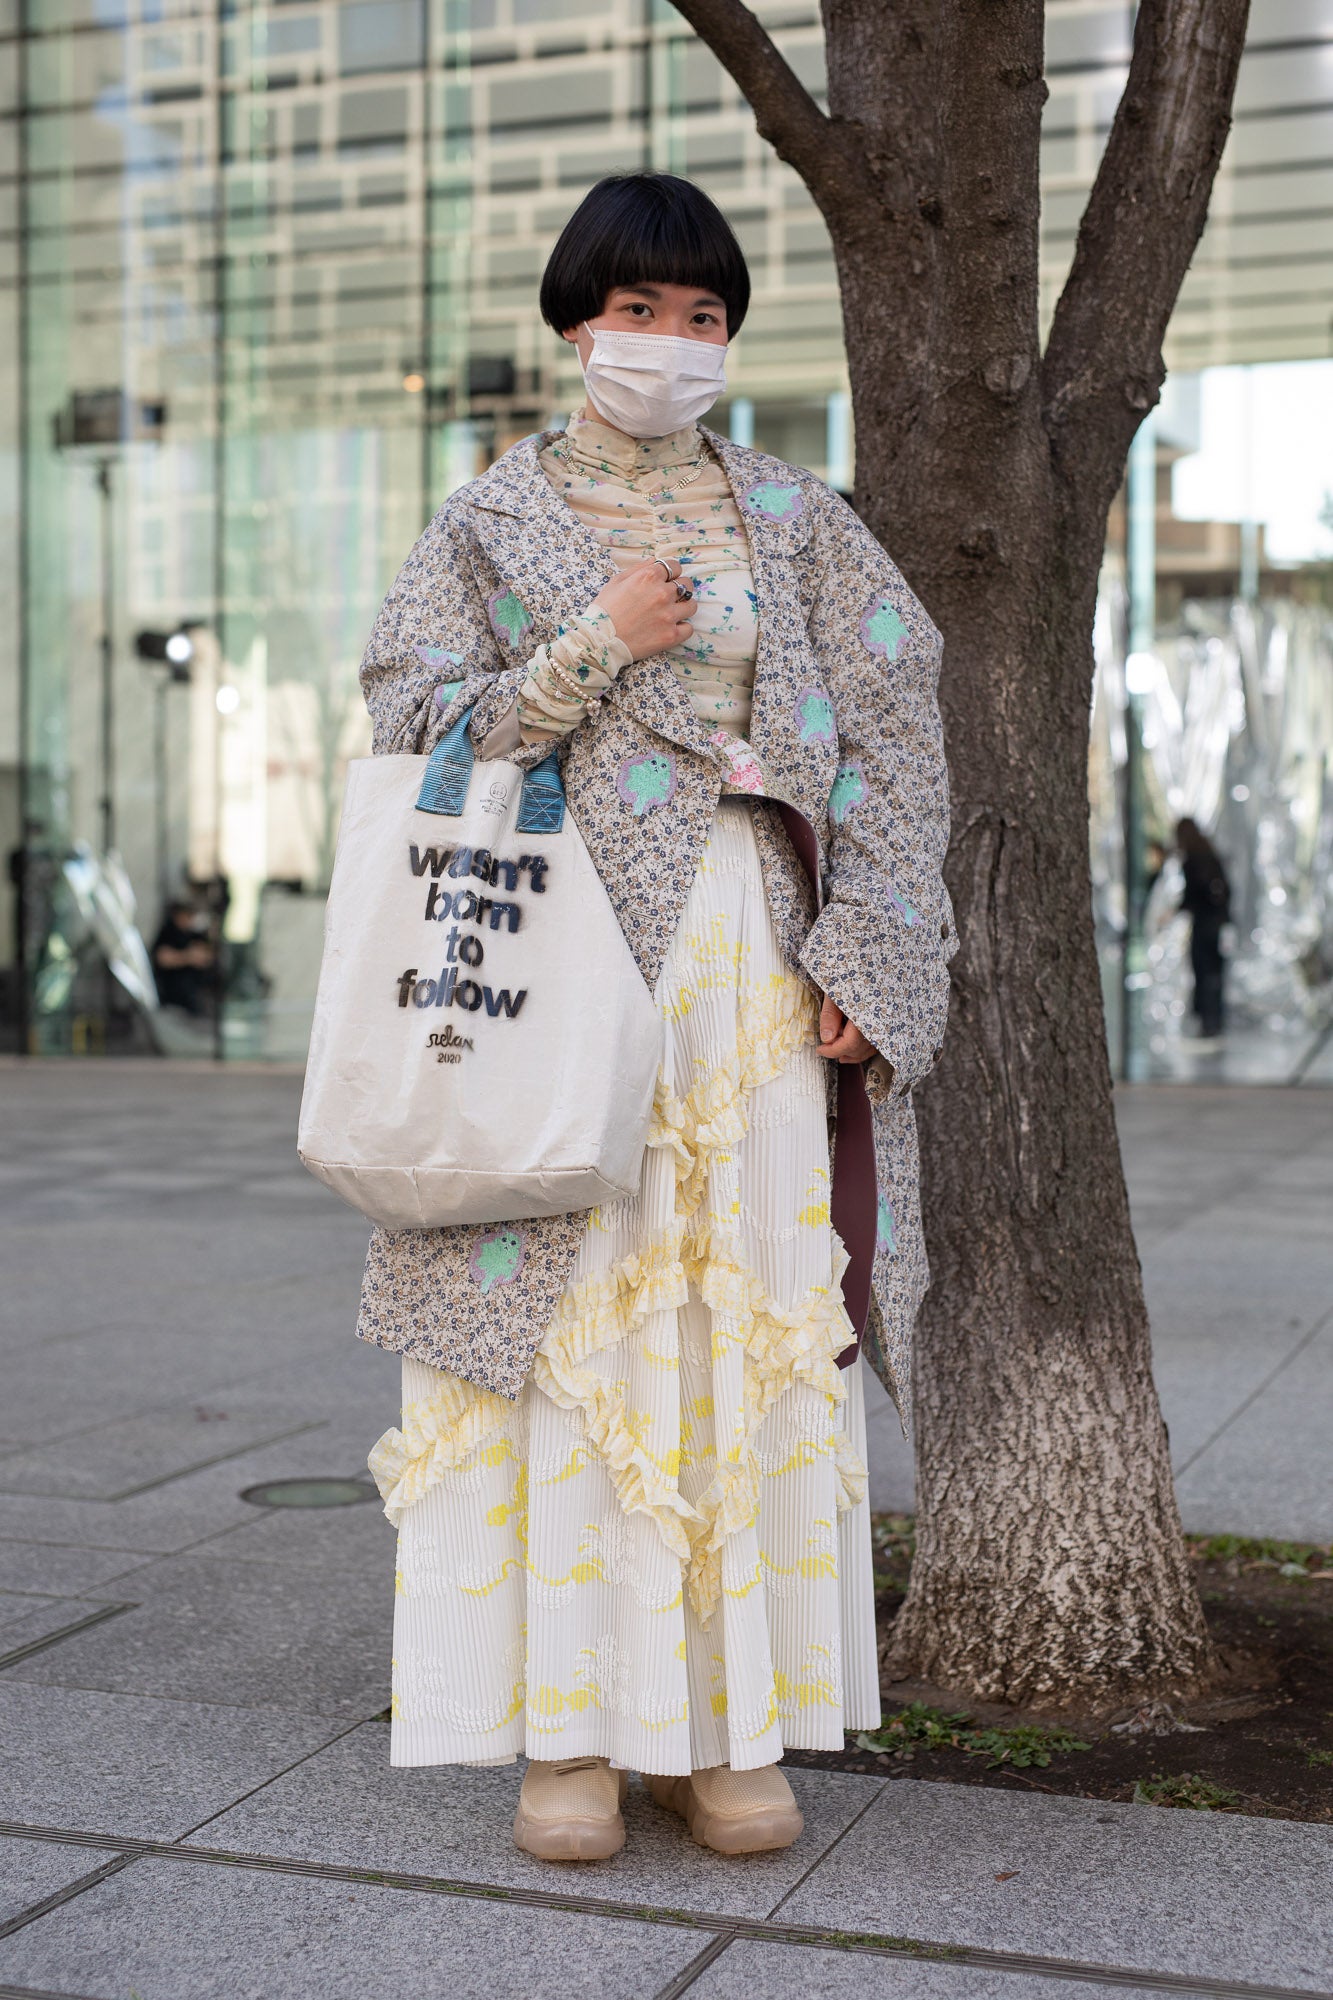 The More Layers, the More Chic, Fashion, Trends in Japan